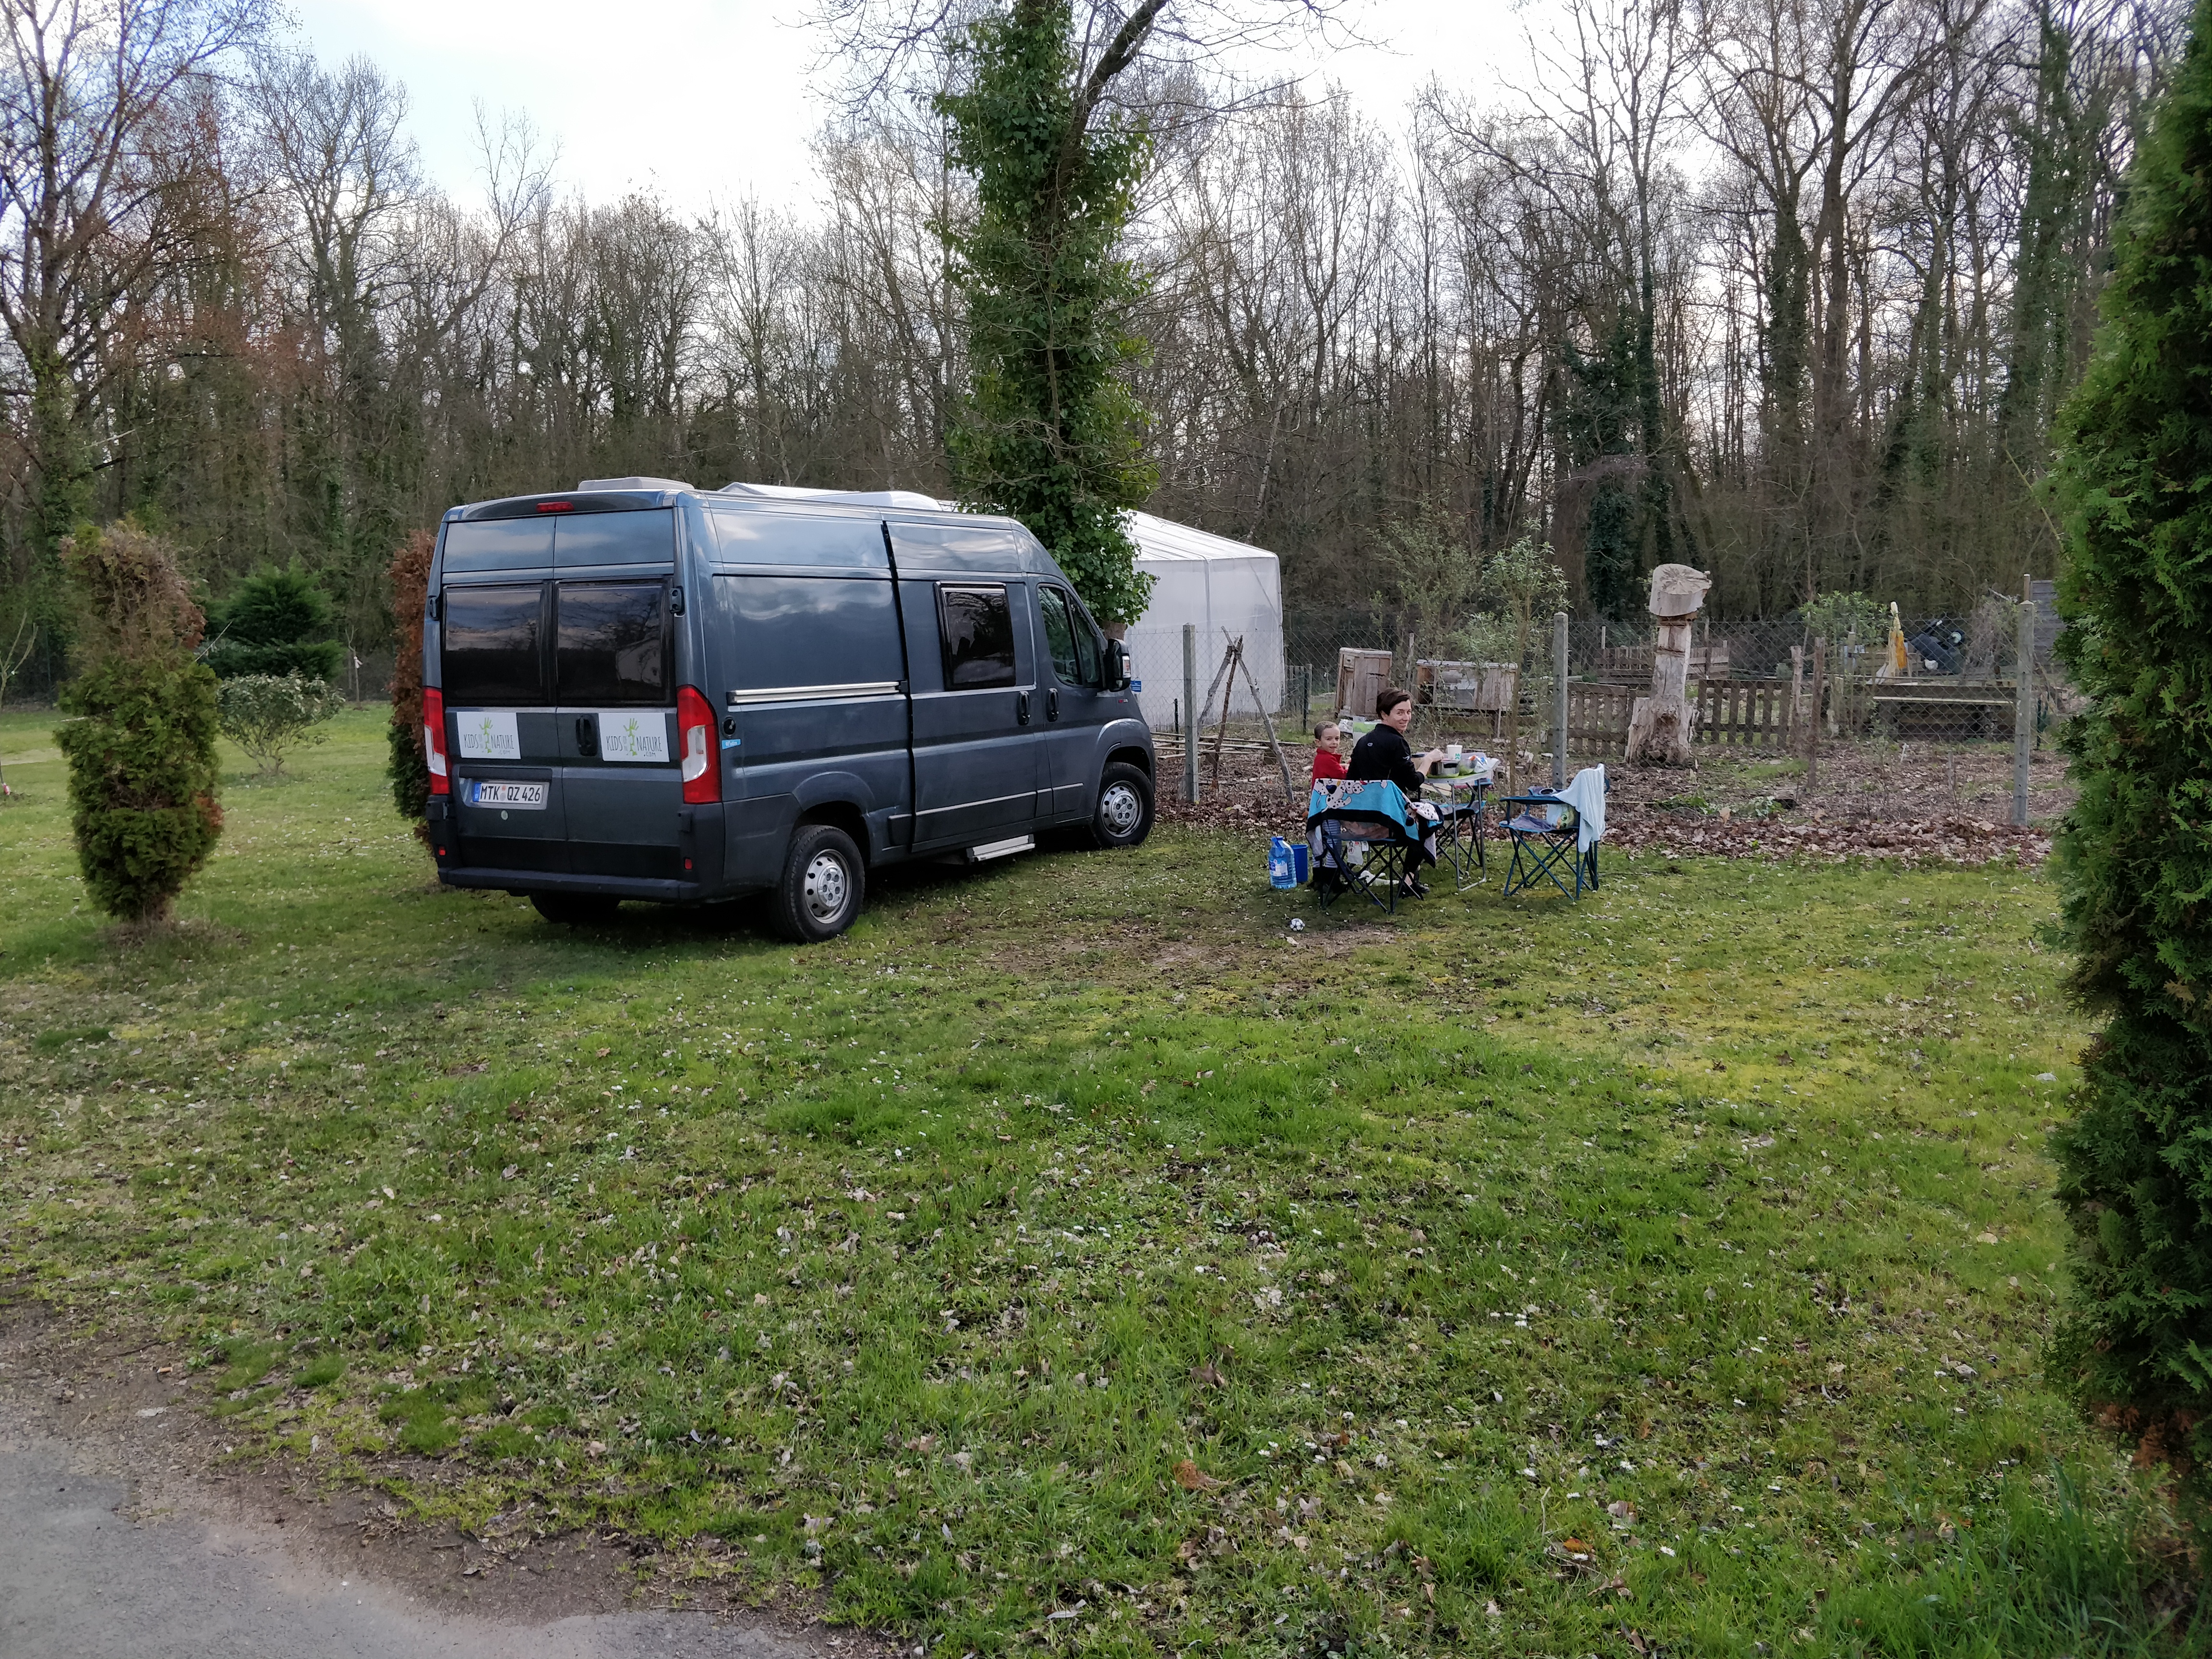 Dedicated space for one camping spot-Les Acacias Camping, Loire Valley, France